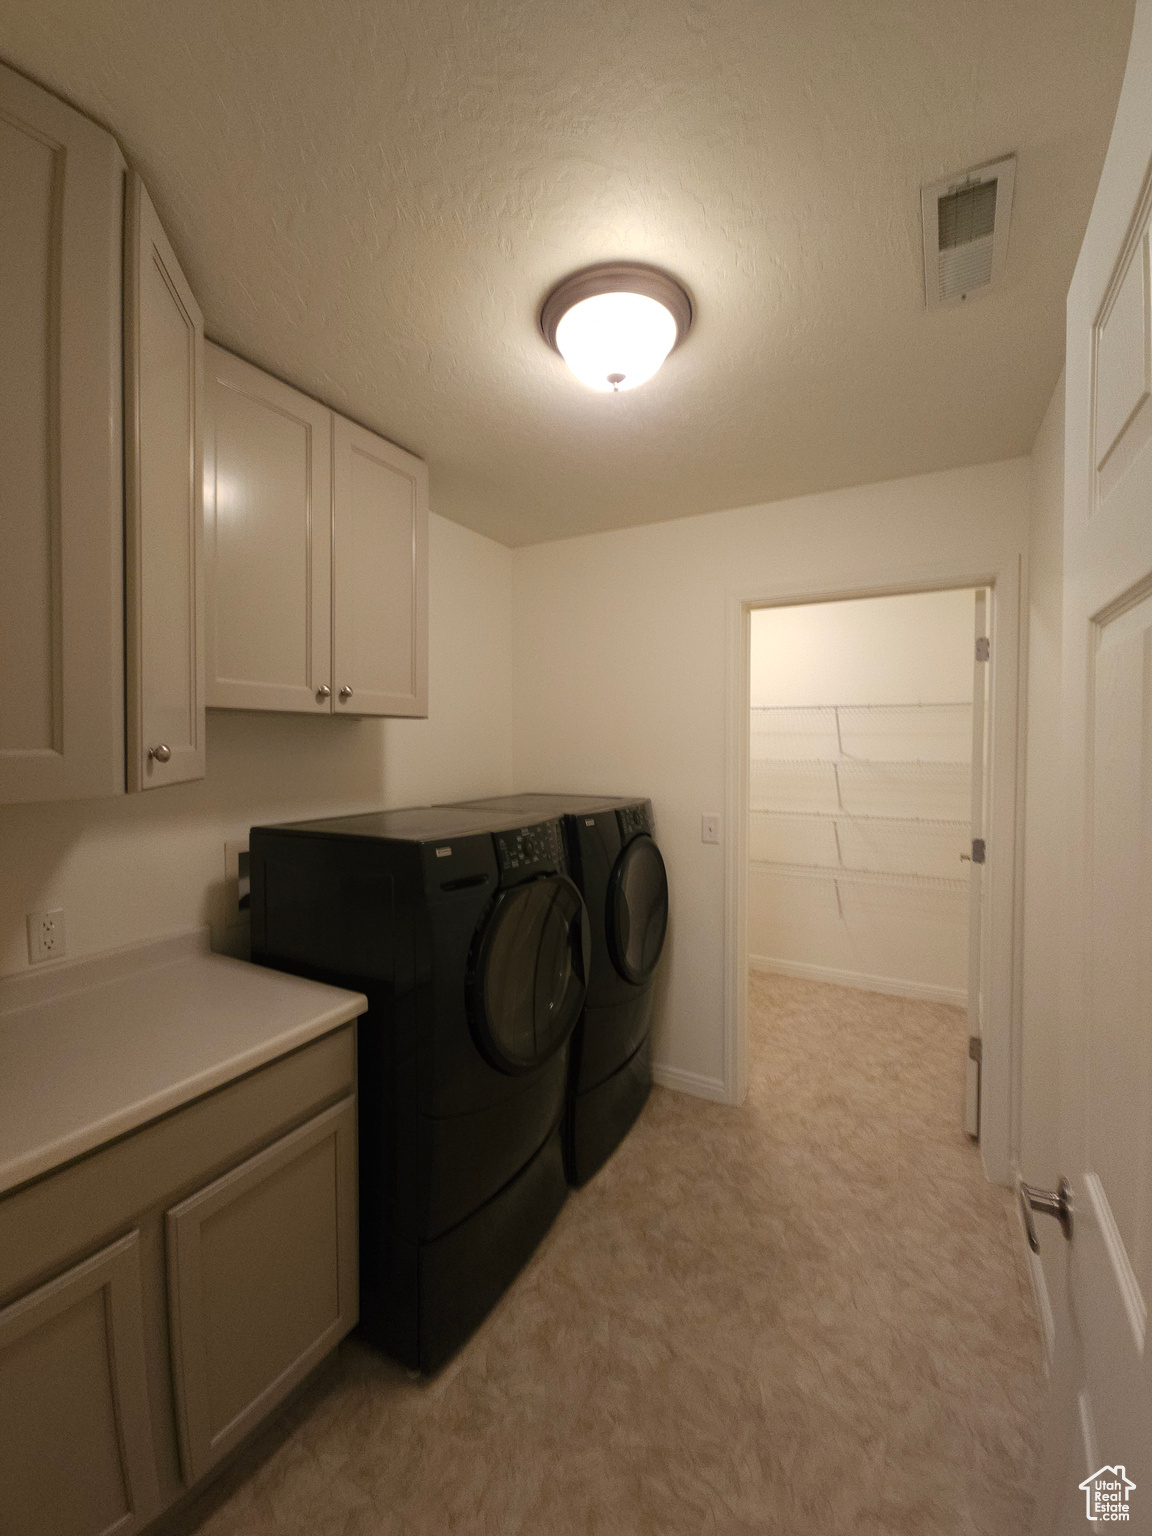 washer and dryer included in this laundry room, with freshly painted cabinets.